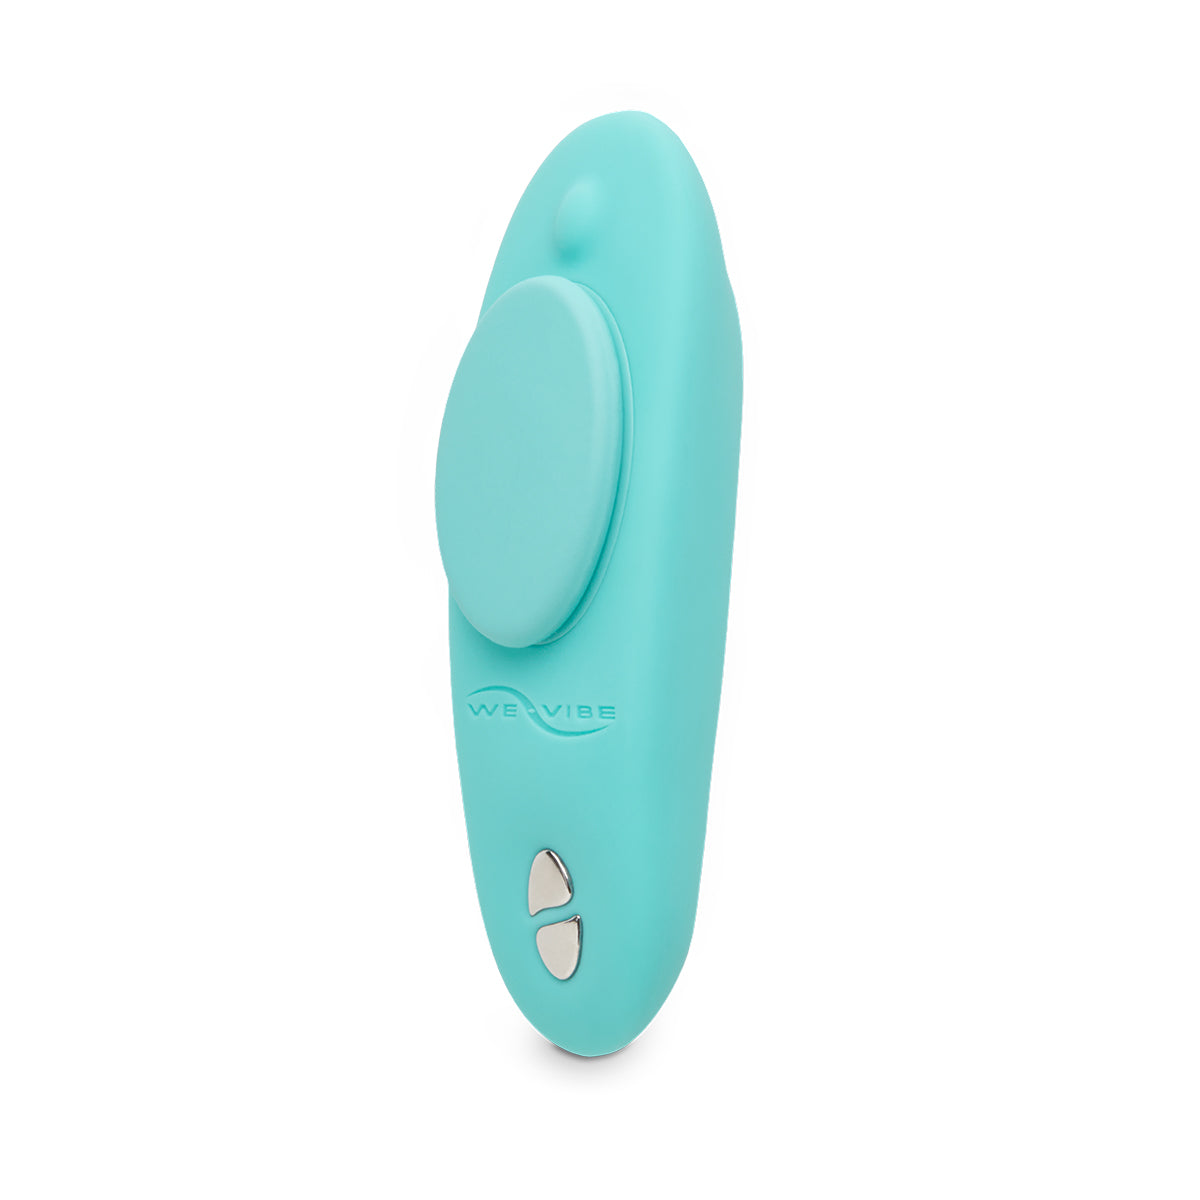 Moxie Wearable Vibrator free shipping - Beyond Delights